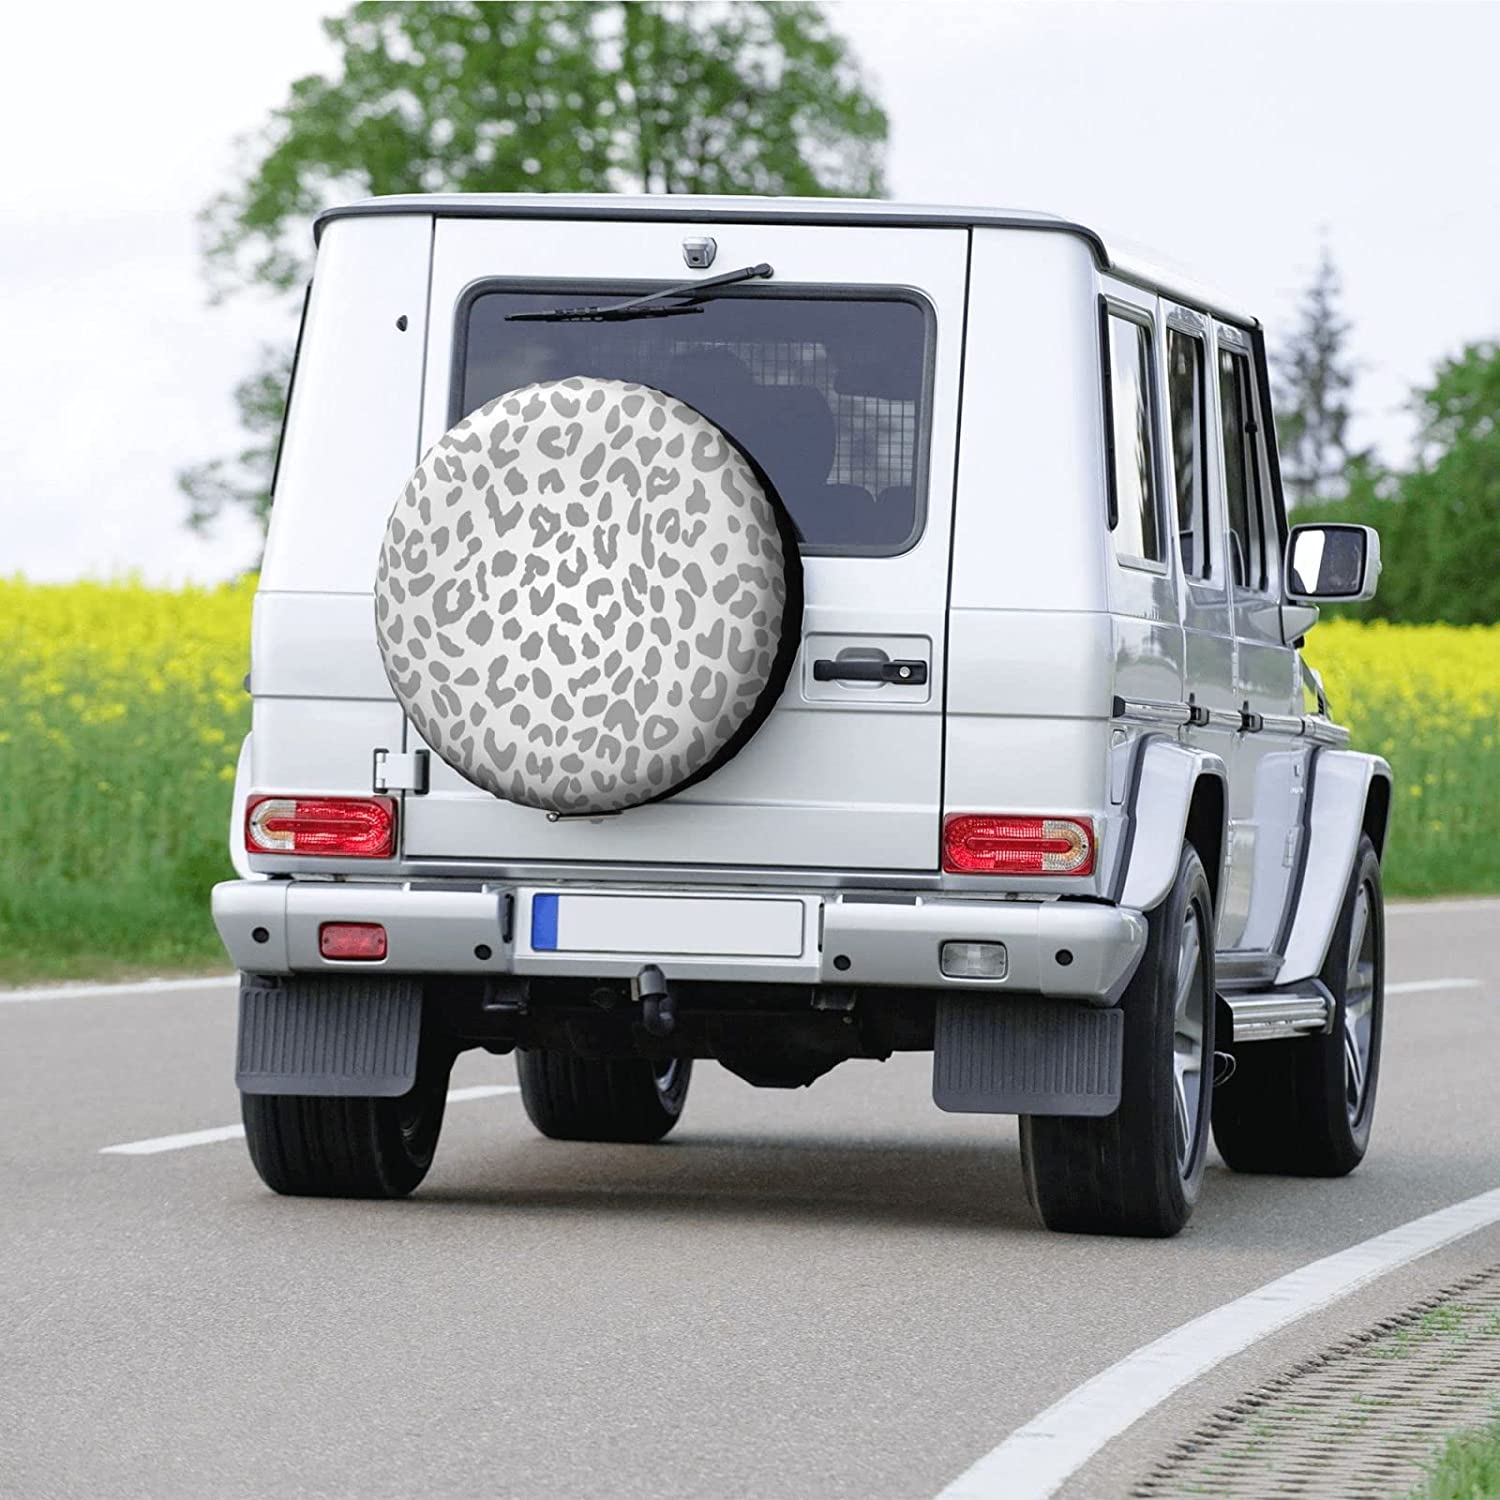 Leopard Print Spare Tire Cover Wheel Protectors Weatherproof Universal Dust- Proof for Trailer Rv SUV Truck Camper Travel Trailer Accessories 14 Inch 